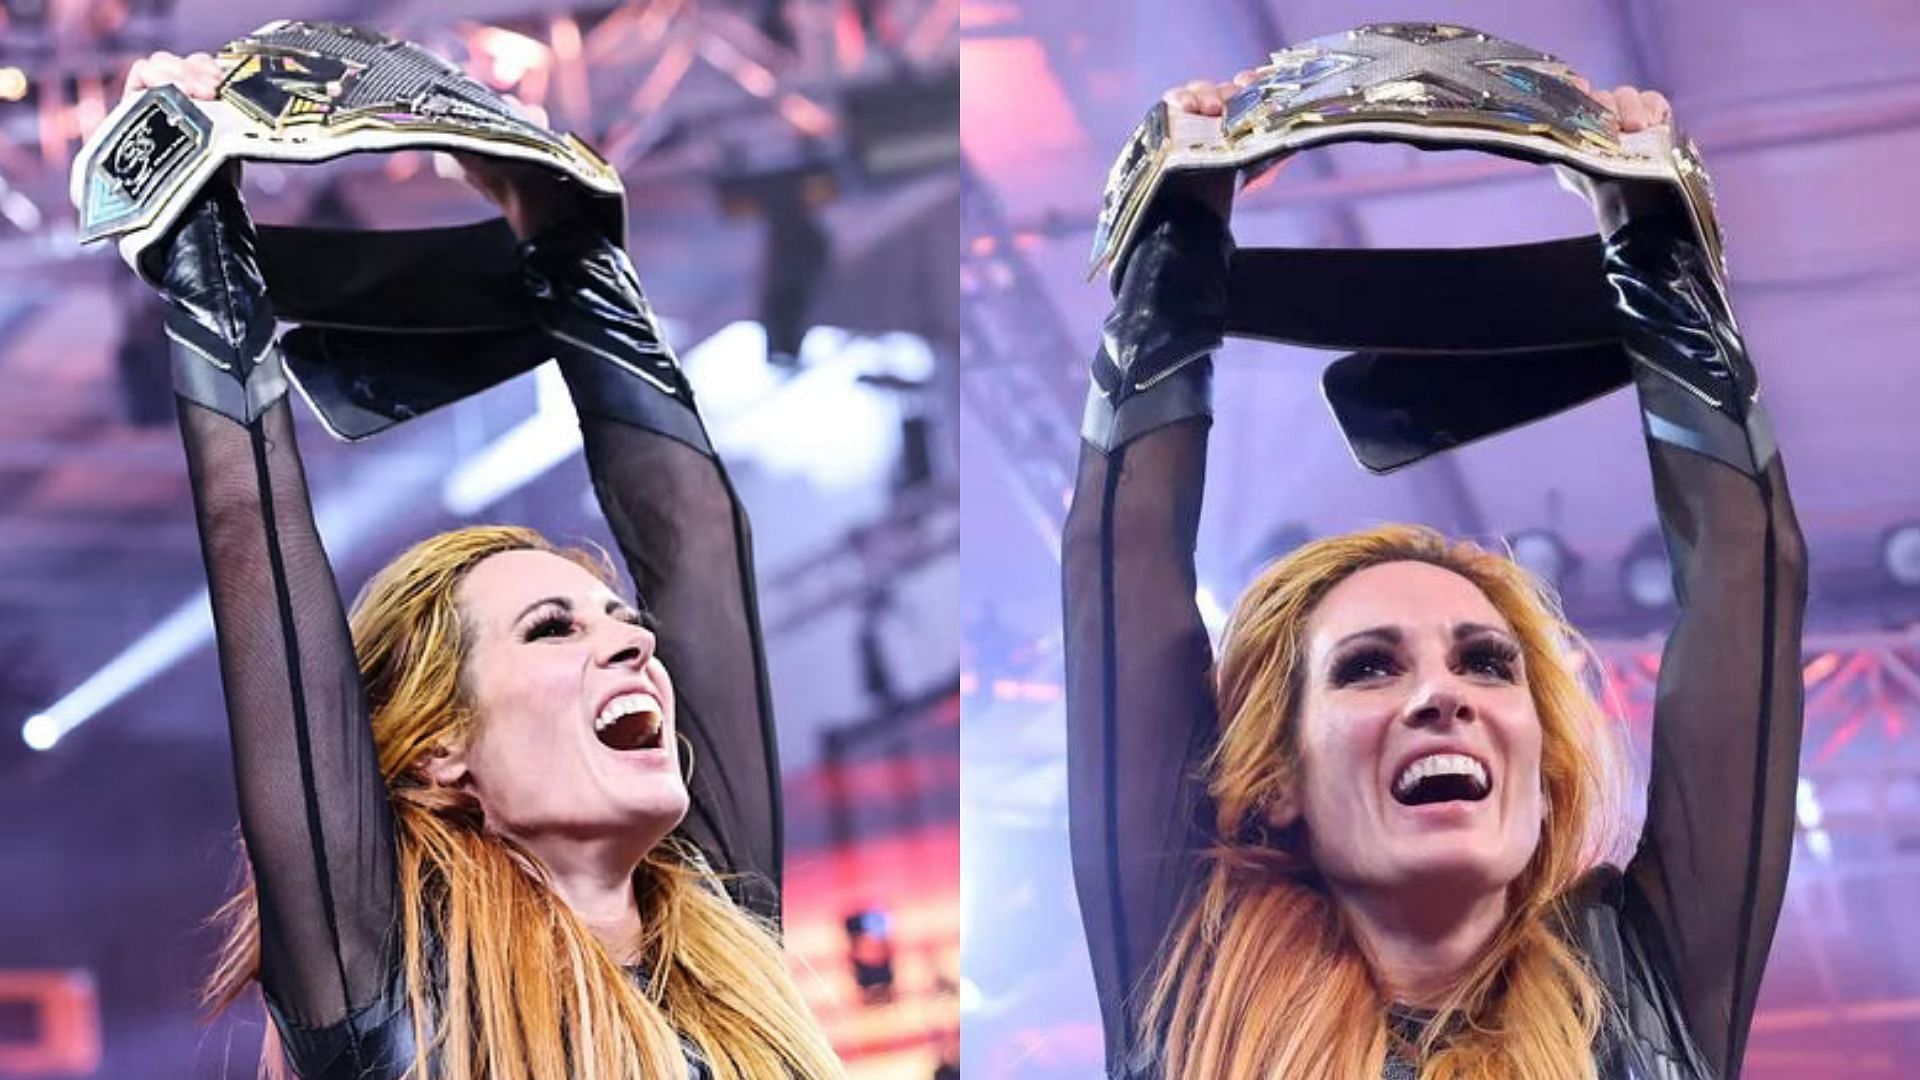 4 Reasons why Becky Lynch becoming the new NXT Women's Champion is ideal